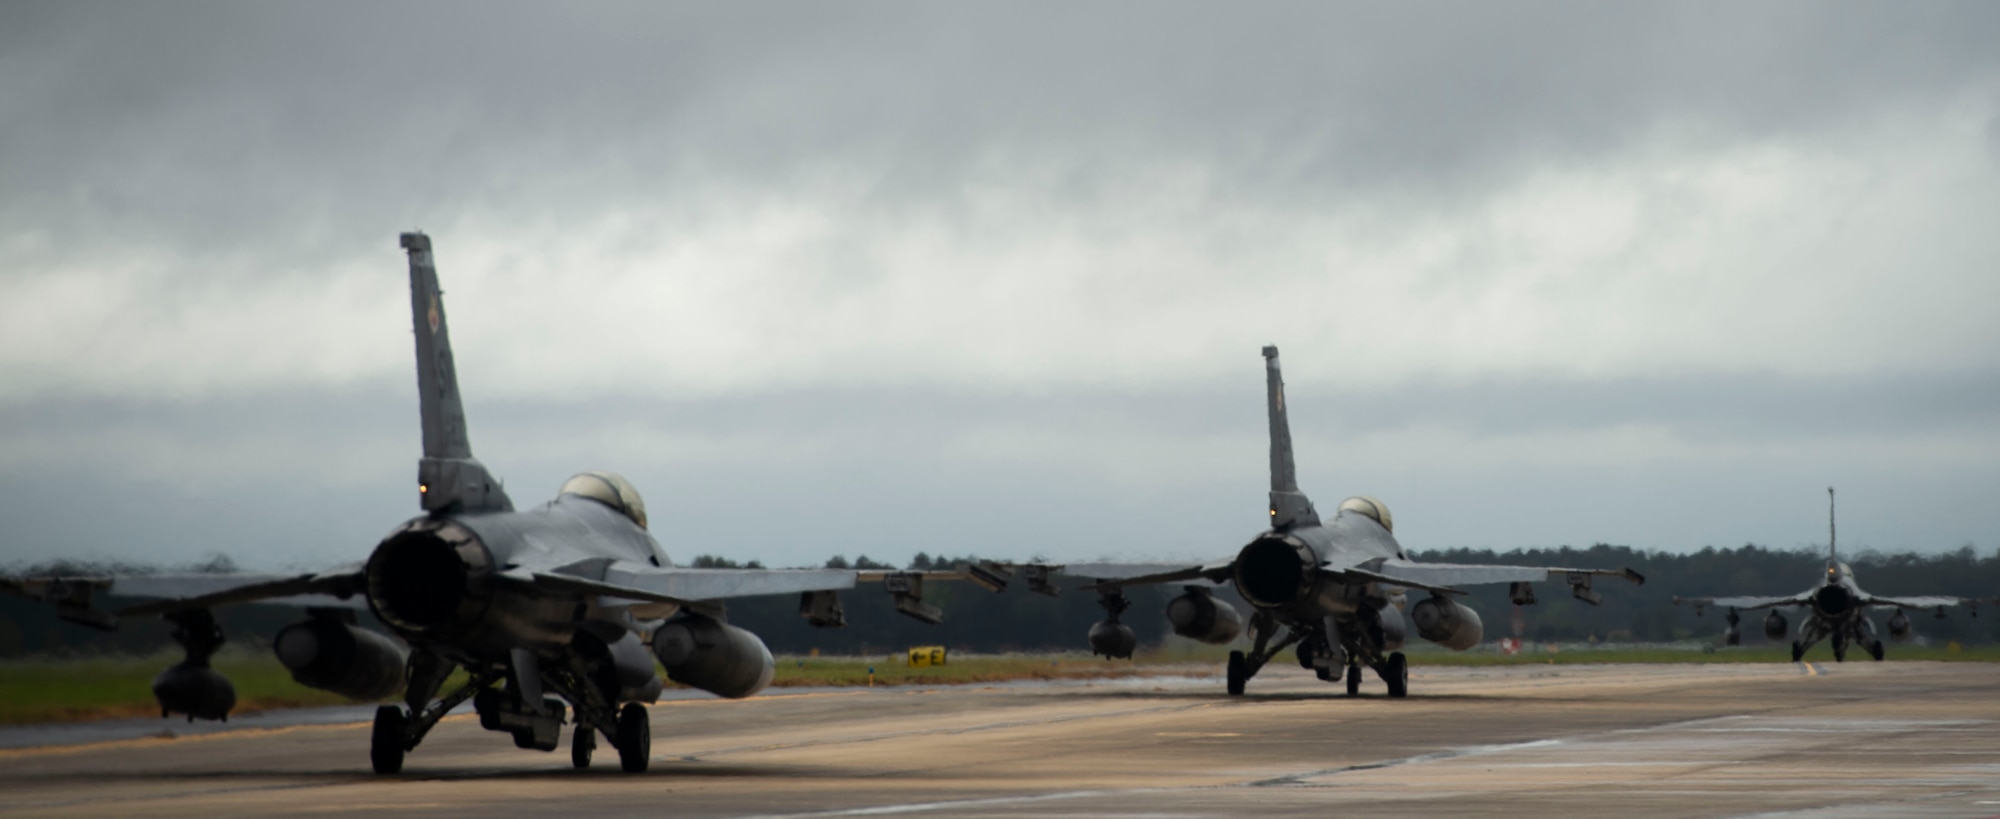 U.S. Air Force F-16CM Fighting Falcons assigned to the 55th Fighter Squadron (FS) taxi on the runway at Shaw Air Force Base, S.C., Oct. 10, 2018.